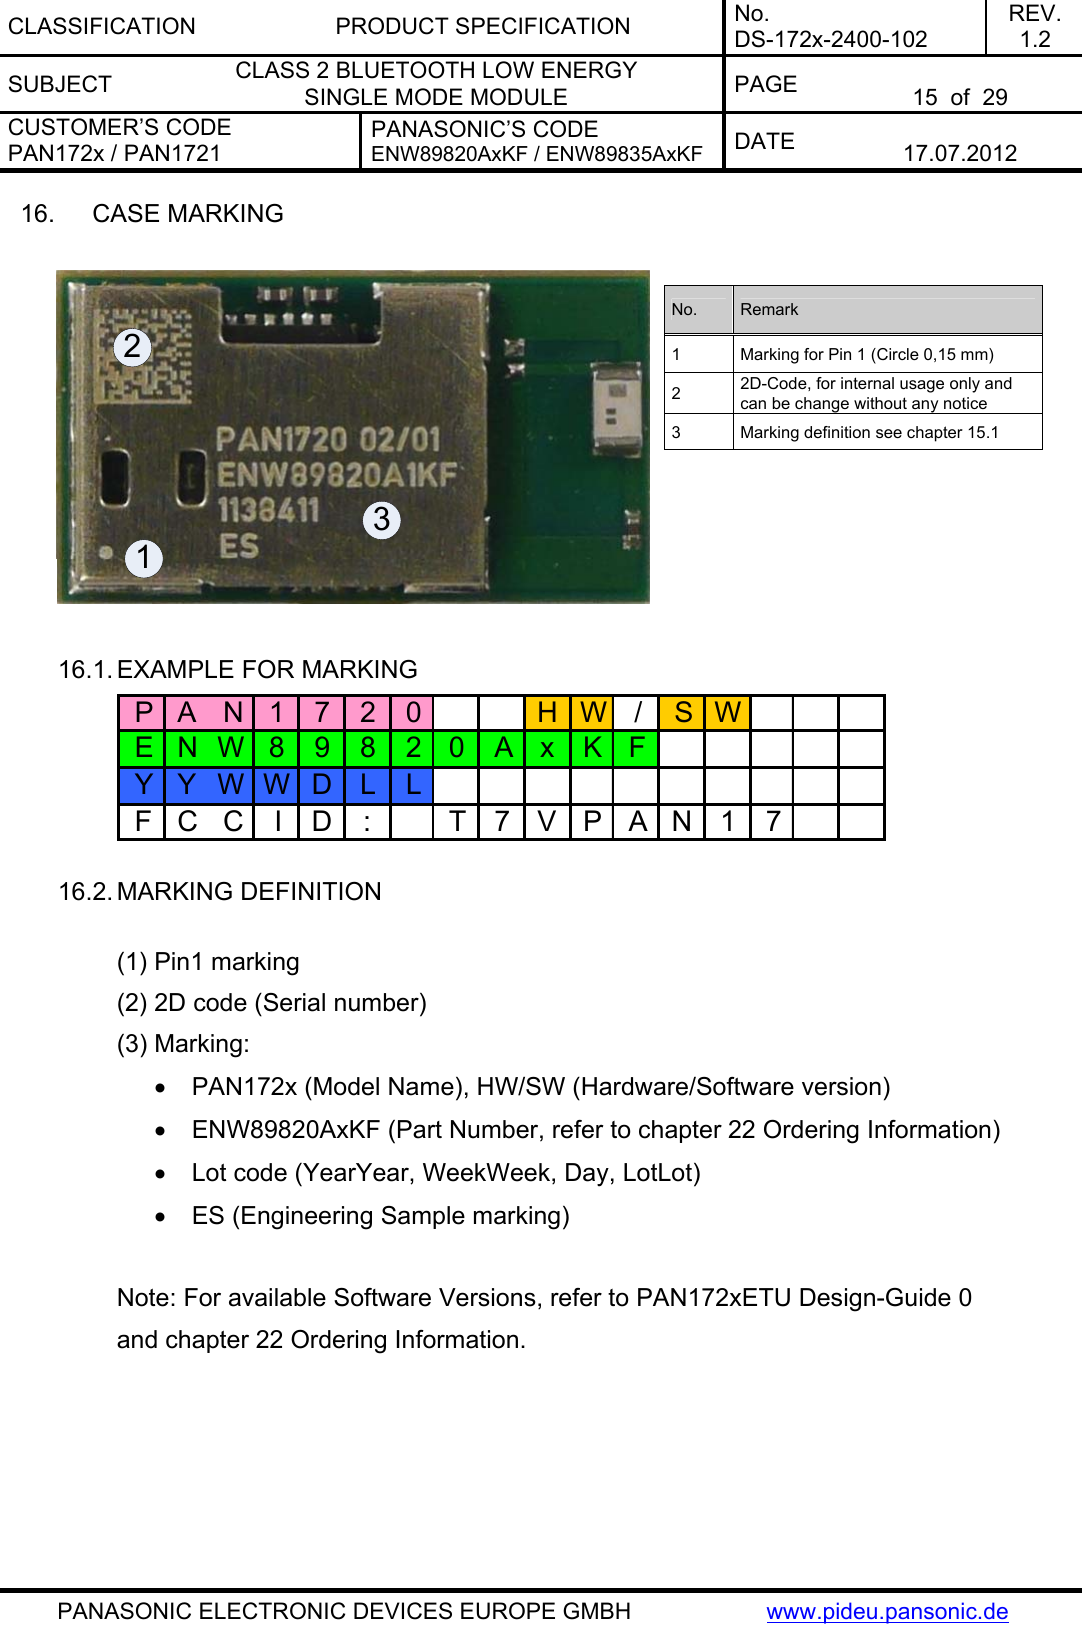 CLASSIFICATION PRODUCT SPECIFICATION No. DS-172x-2400-102 REV. 1.2 SUBJECT  CLASS 2 BLUETOOTH LOW ENERGY  SINGLE MODE MODULE  PAGE   15  of  29 CUSTOMER’S CODE PAN172x / PAN1721 PANASONIC’S CODE ENW89820AxKF / ENW89835AxKF  DATE   17.07.2012   PANASONIC ELECTRONIC DEVICES EUROPE GMBH  www.pideu.pansonic.de 16.  CASE MARKING  123 No.  Remark 1  Marking for Pin 1 (Circle 0,15 mm) 2  2D-Code, for internal usage only and can be change without any notice 3  Marking definition see chapter 15.1  16.1. EXAMPLE FOR MARKING PAN1 7 2 0 HW / SWENW8 9 8 2 0 Ax KFYYWWD L LFCCID: T7VPAN17 16.2. MARKING DEFINITION  (1) Pin1 marking (2) 2D code (Serial number) (3) Marking: •  PAN172x (Model Name), HW/SW (Hardware/Software version)  •  ENW89820AxKF (Part Number, refer to chapter 22 Ordering Information)  •  Lot code (YearYear, WeekWeek, Day, LotLot) •  ES (Engineering Sample marking)     Note: For available Software Versions, refer to PAN172xETU Design-Guide 0  and chapter 22 Ordering Information.   